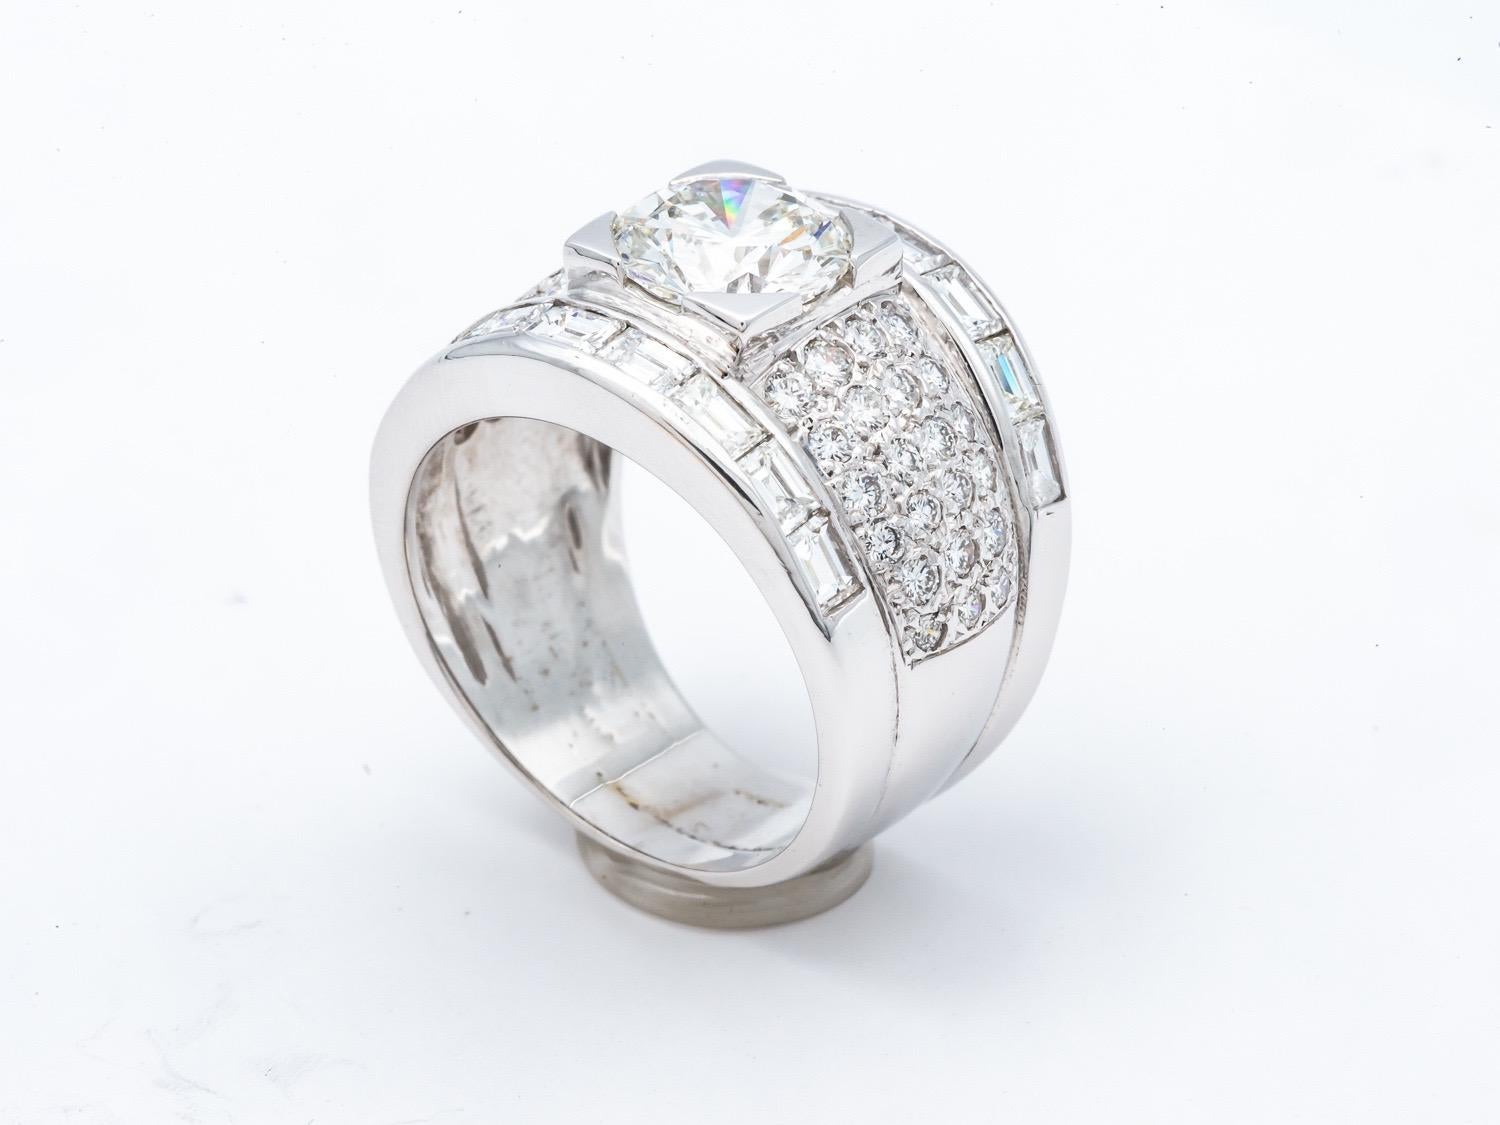 Discover this sumptuous Tank ring in 18-carat white gold, adorned with an impressive 2.15-carat HRD-certified center diamond. This ring embodies elegance and refinement, making it the ideal choice to celebrate the most precious moments of your